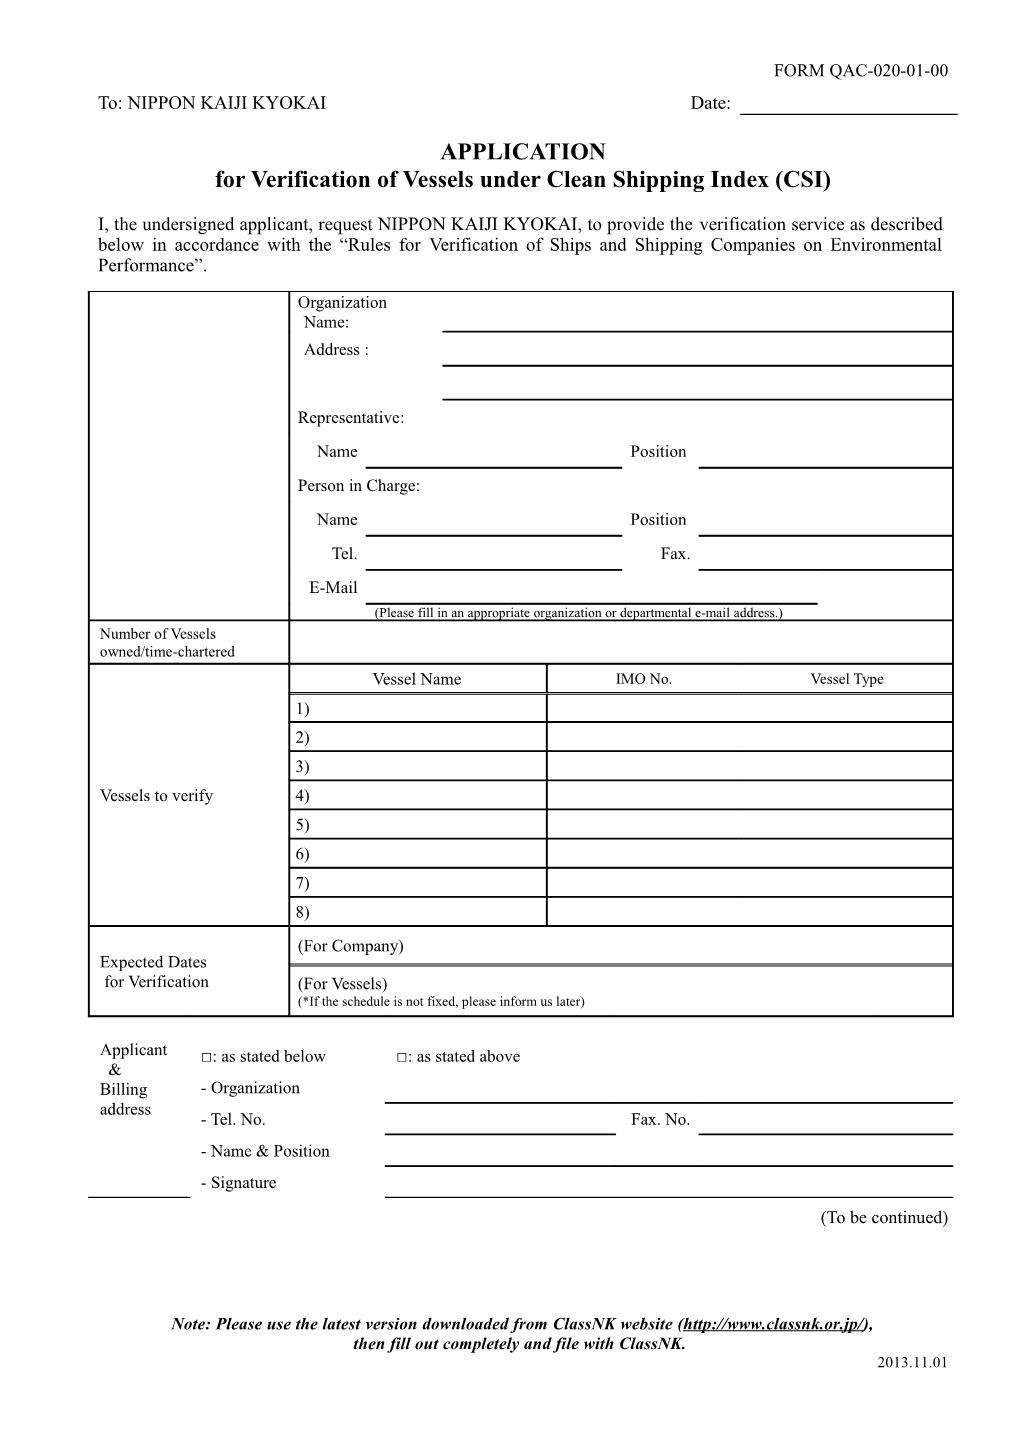 Then Fill out Completely and File with Classnk